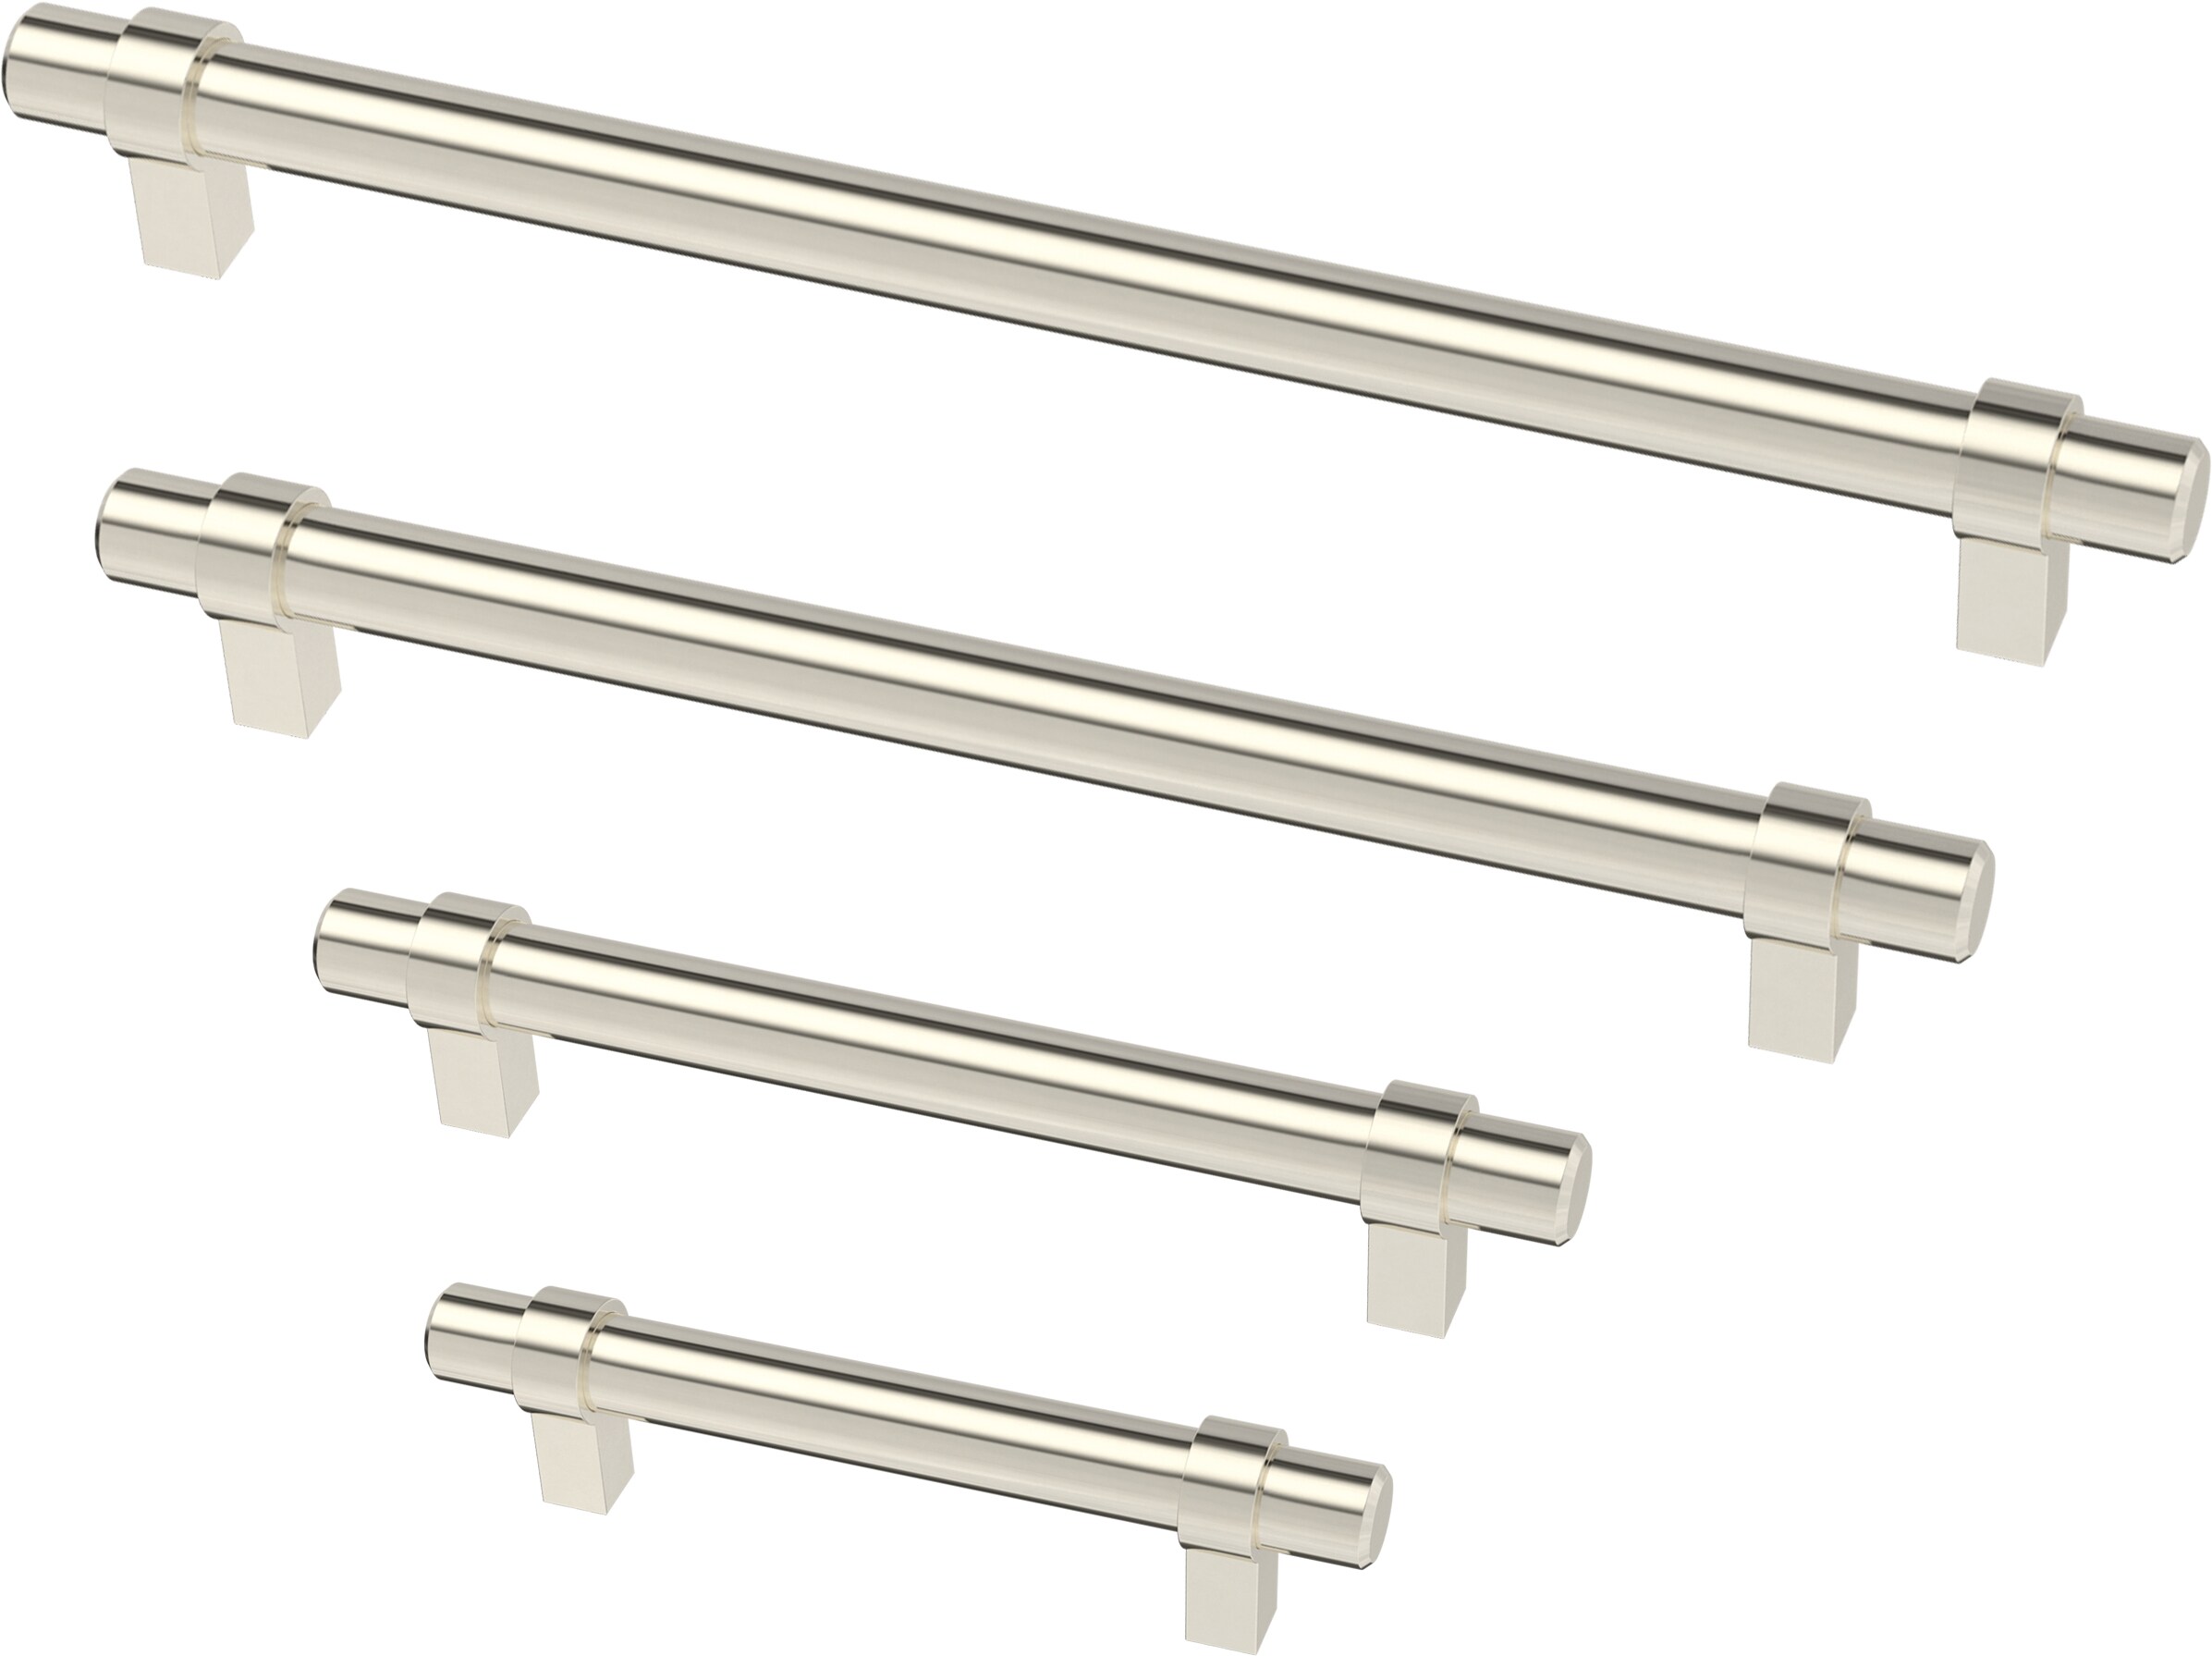 Franklin Brass Simple Wrapped Bar 30-Pack 8-13/16-in Center to Center Stainless Steel Rectangular Bar Drawer Pulls